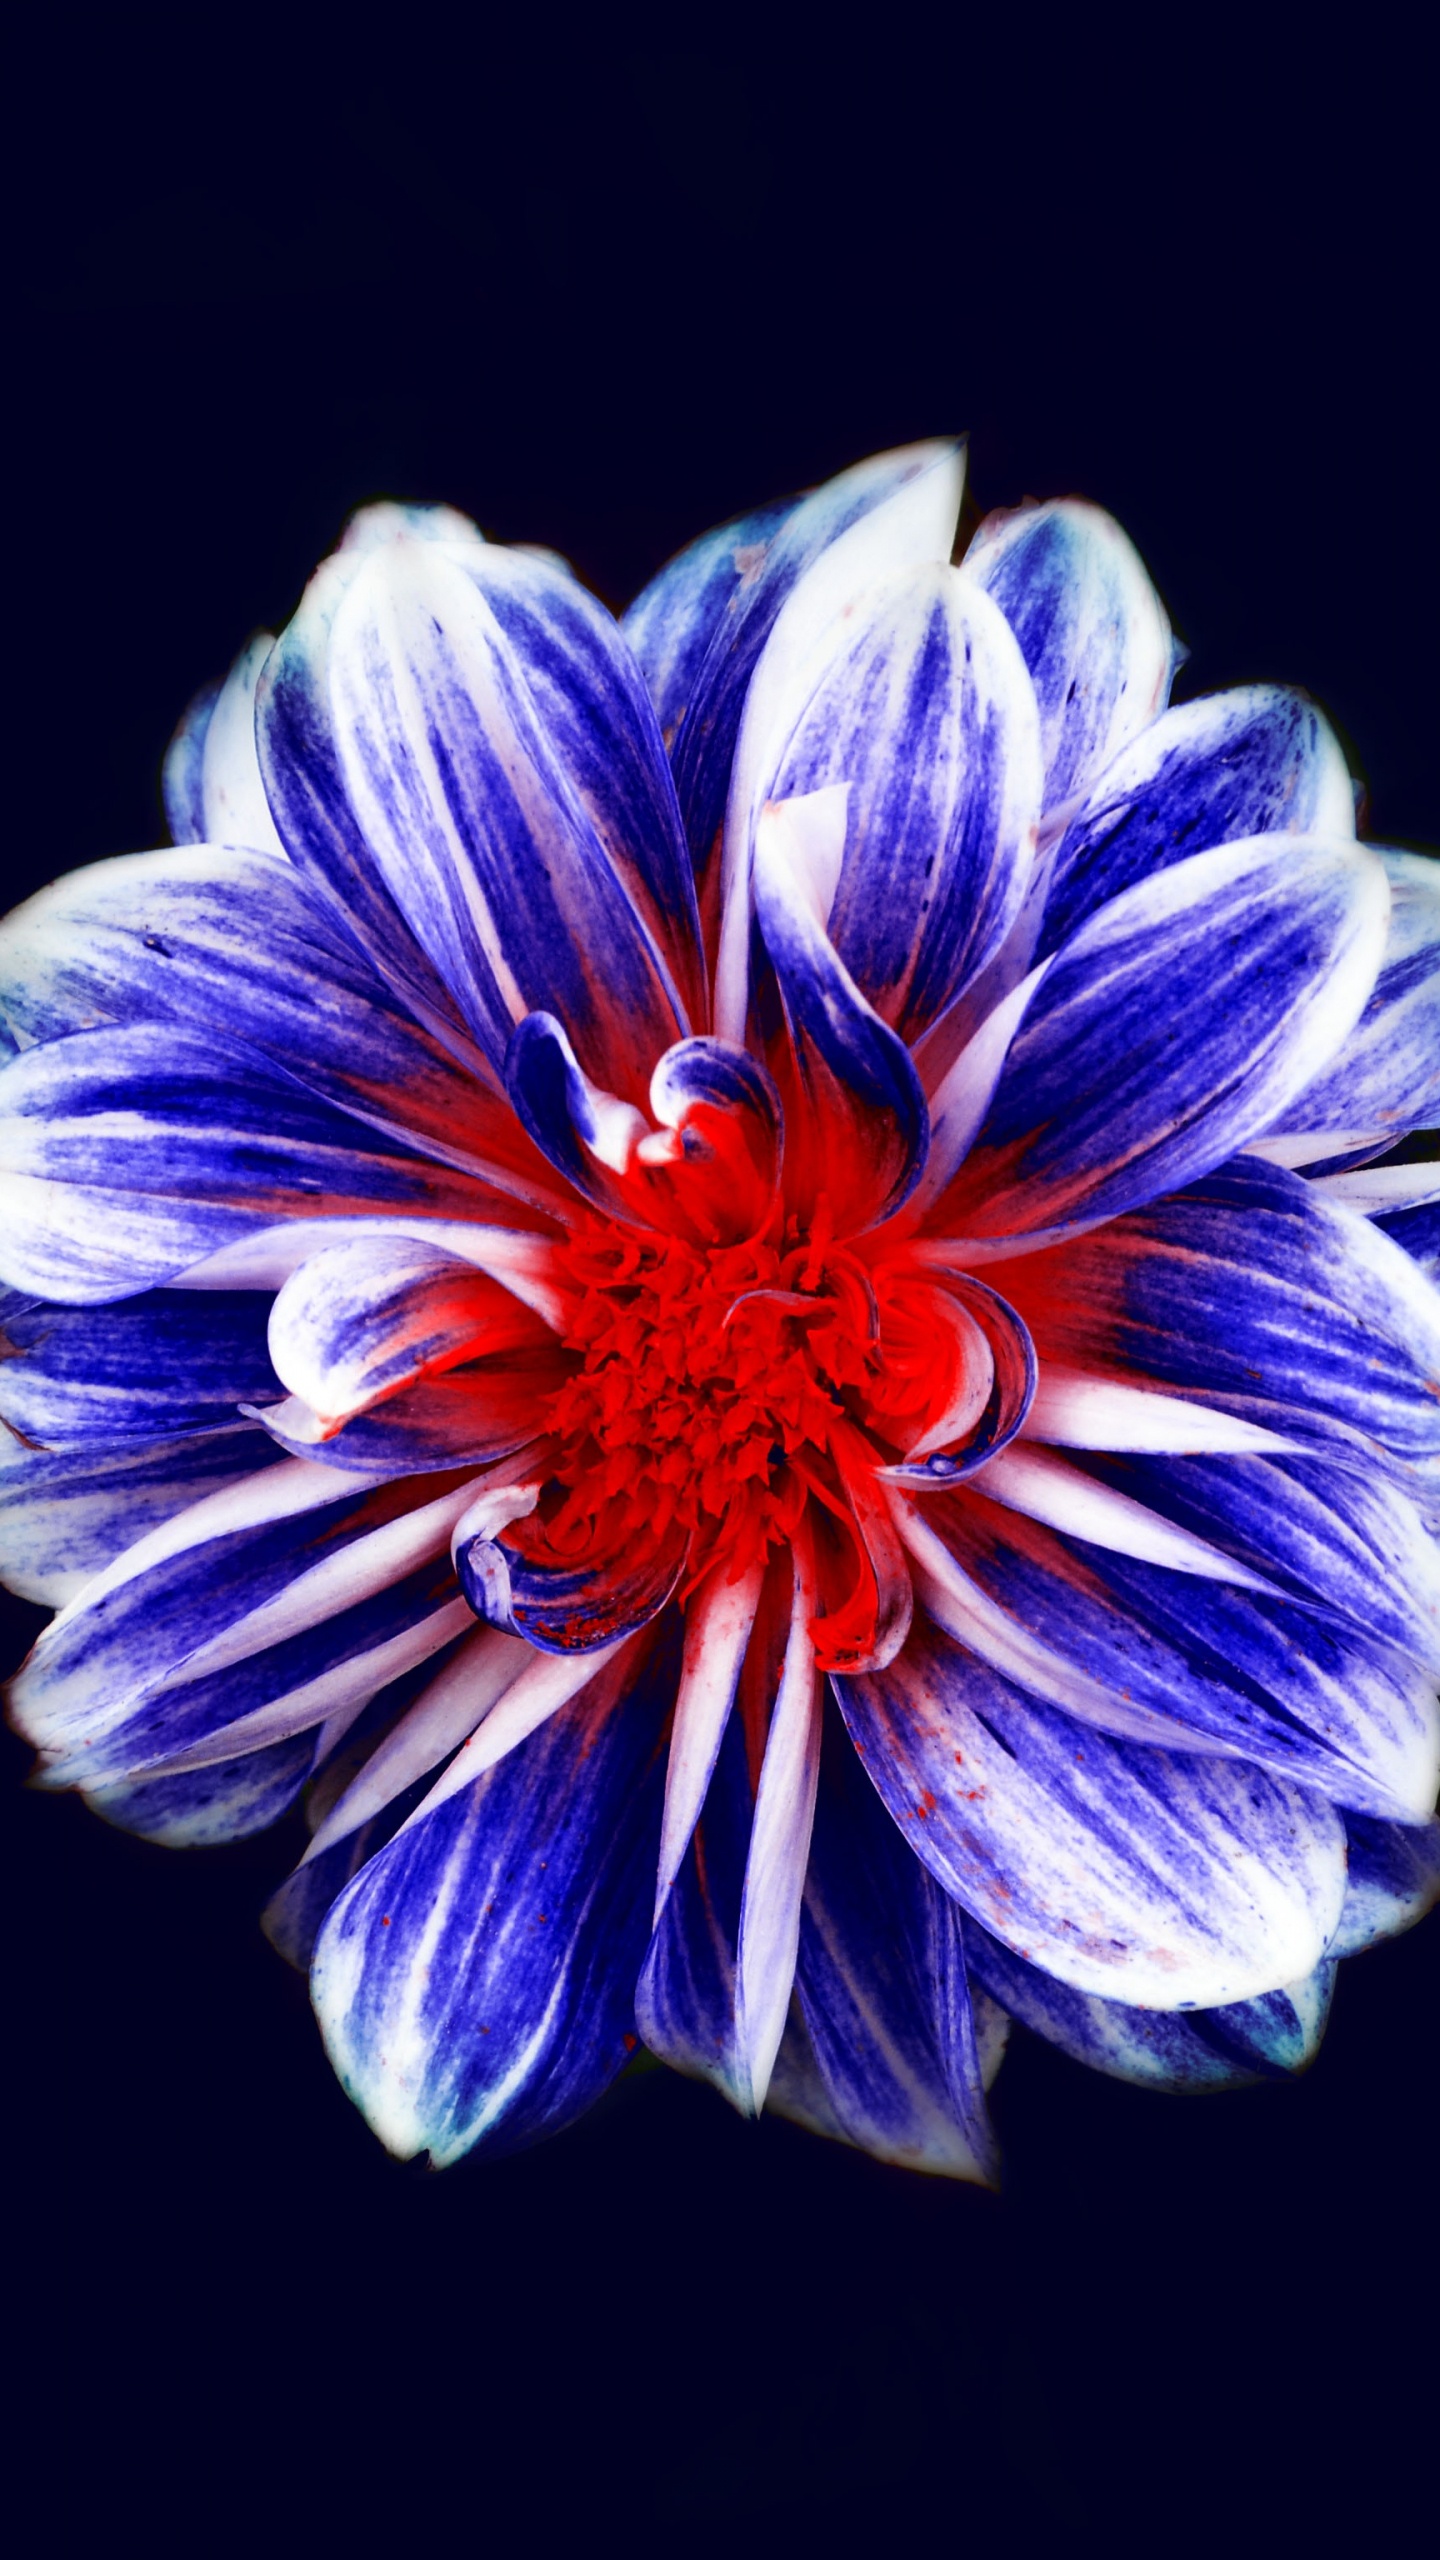 Purple and White Flower in Black Background. Wallpaper in 1440x2560 Resolution